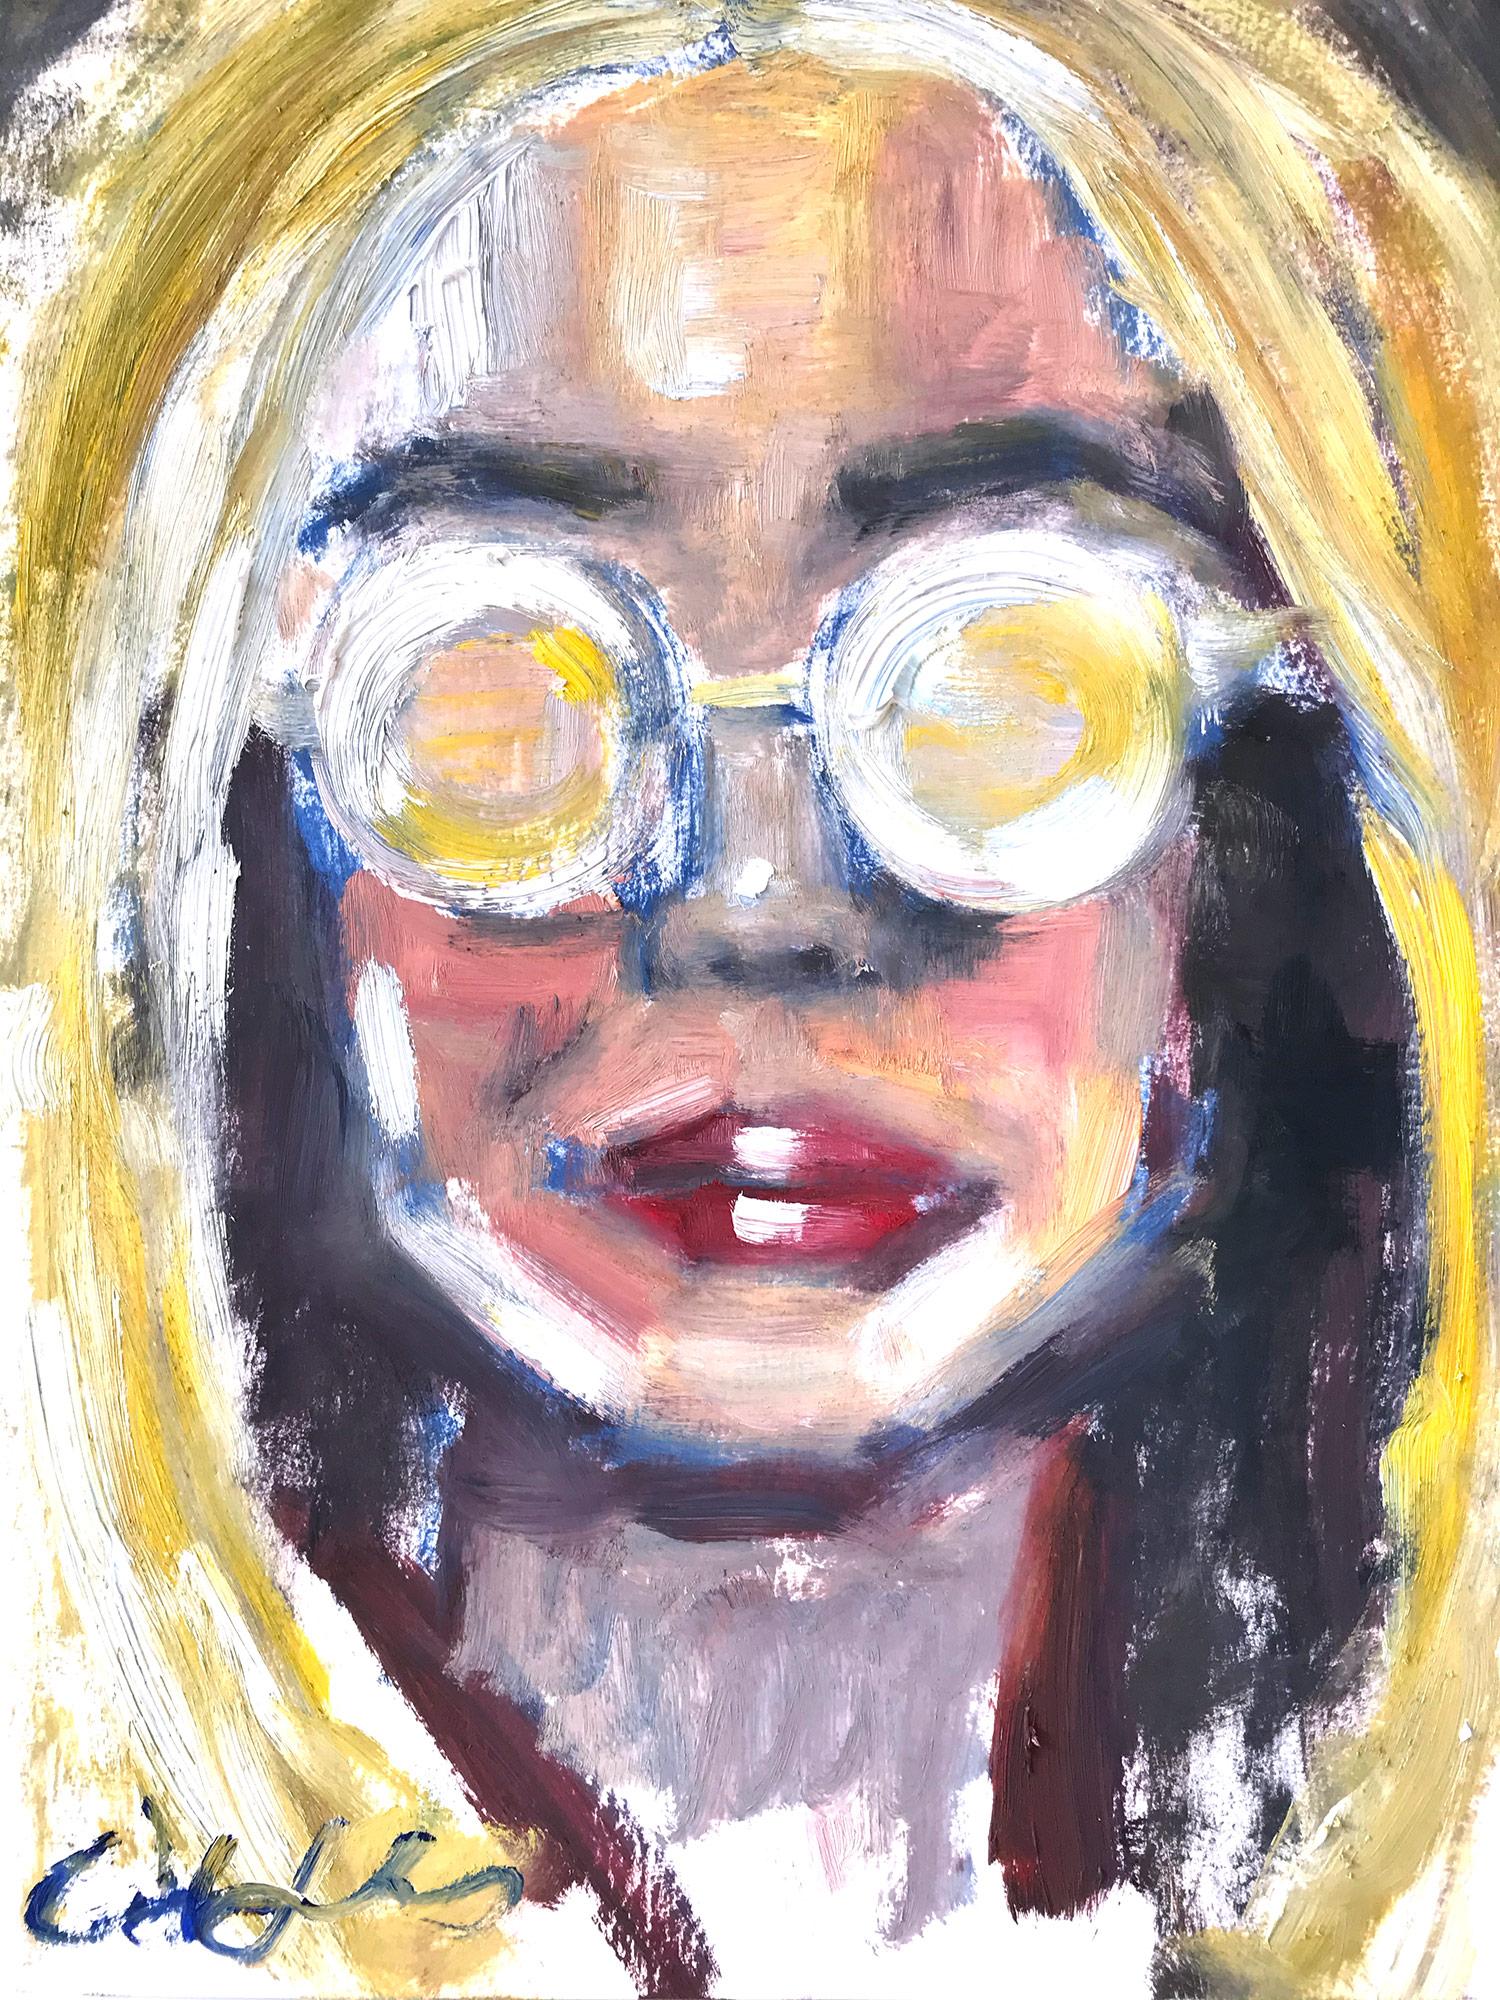 Cindy Shaoul Figurative Painting - "Summer Mood" Portrait of Young Girl with Sunglasses Oil Painting on Paper